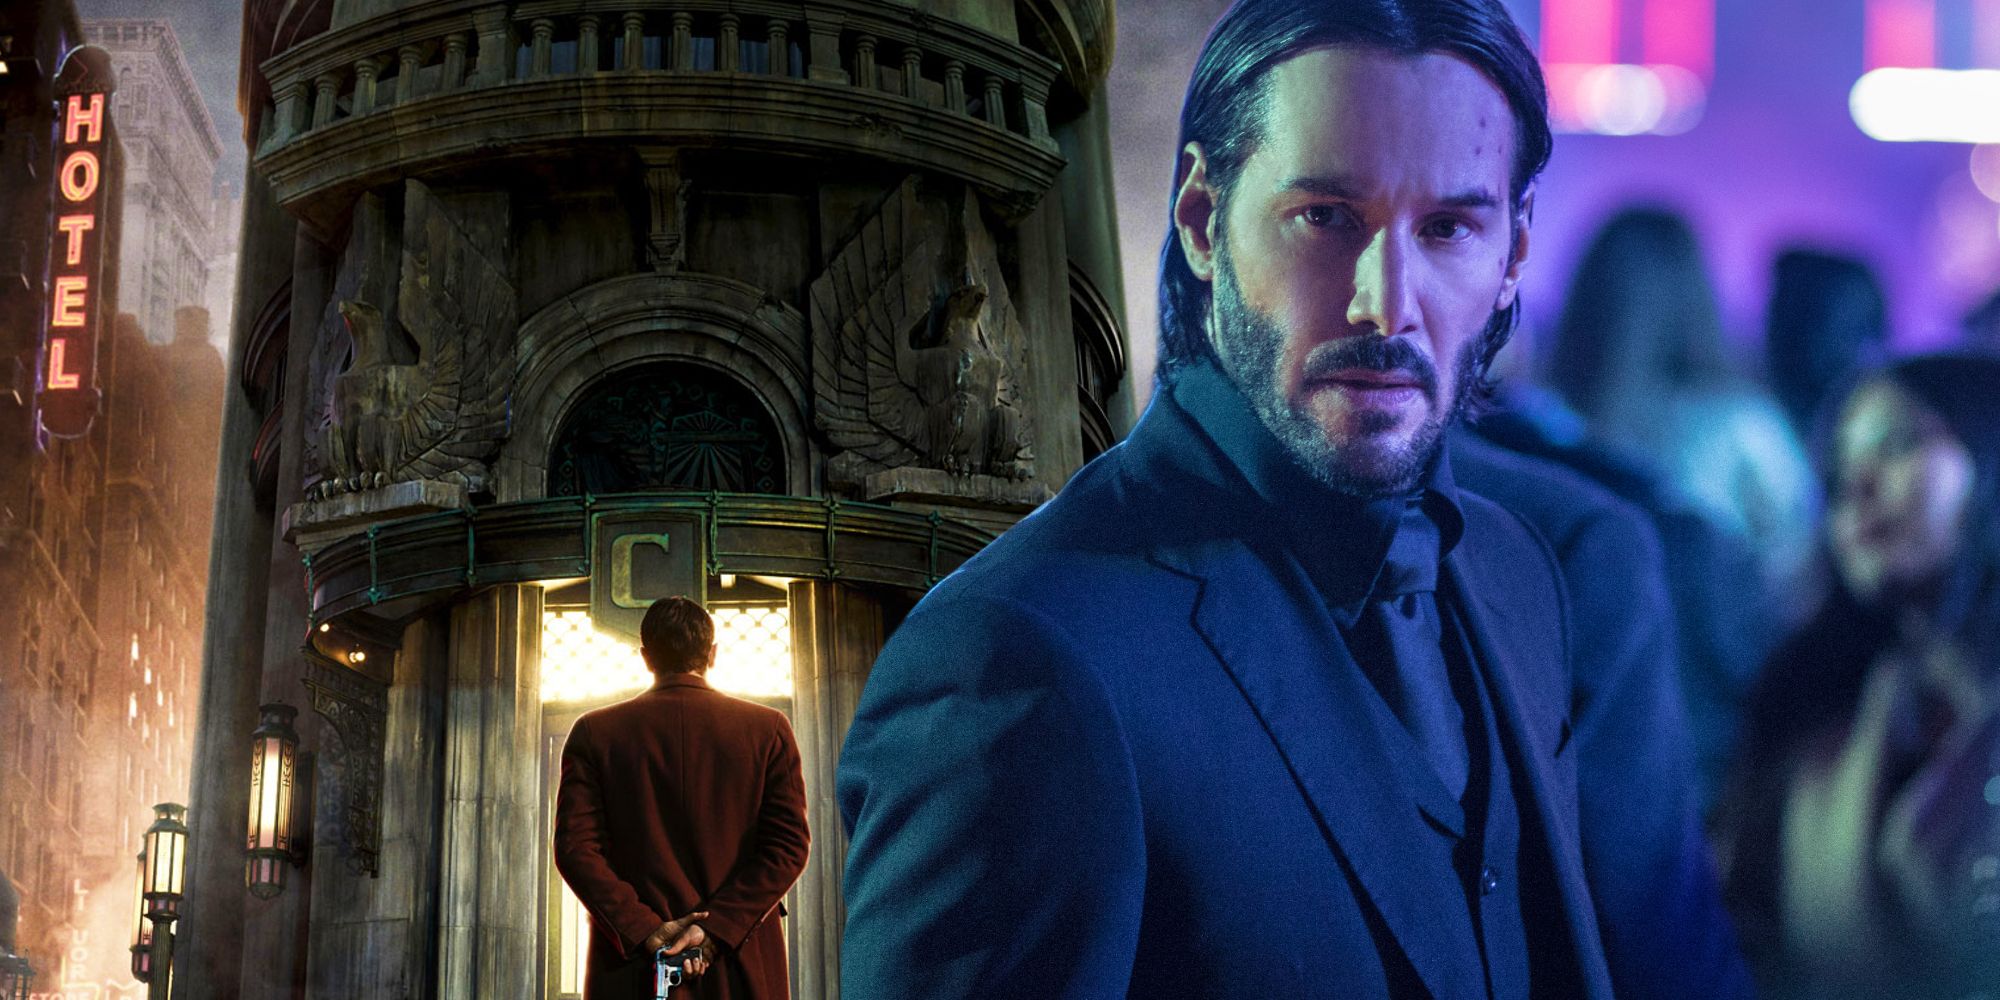 The Continental's poster next to Keanu Reeves as John Wick